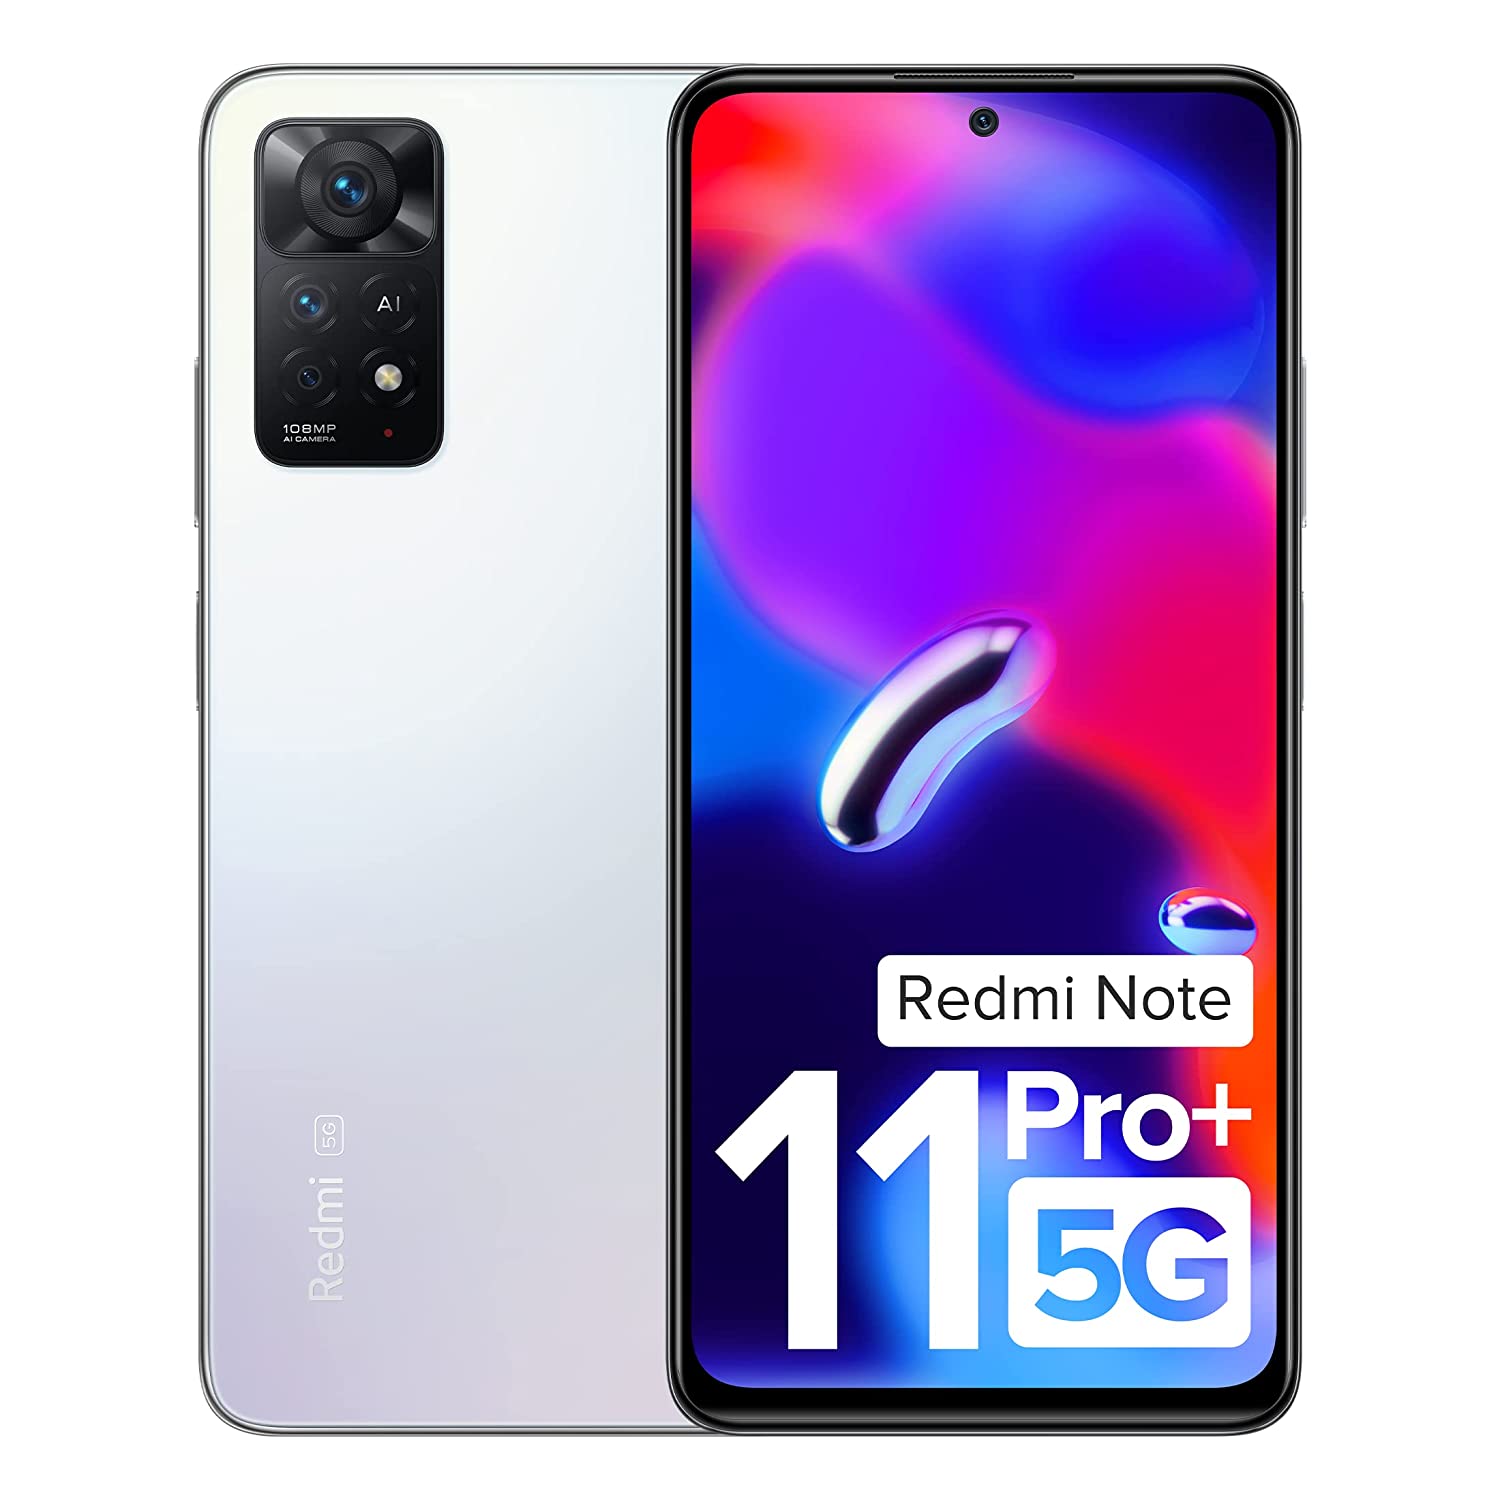 (Renewed) Redmi Note 11 Pro + 5G (Phantom White, 8GB RAM, 128GB Storage) | 67W Turbo Charge | 120Hz Super AMOLED Display | Additional Exchange Offers | Charger Included| Get 2 Months of YouTube Premium Free!